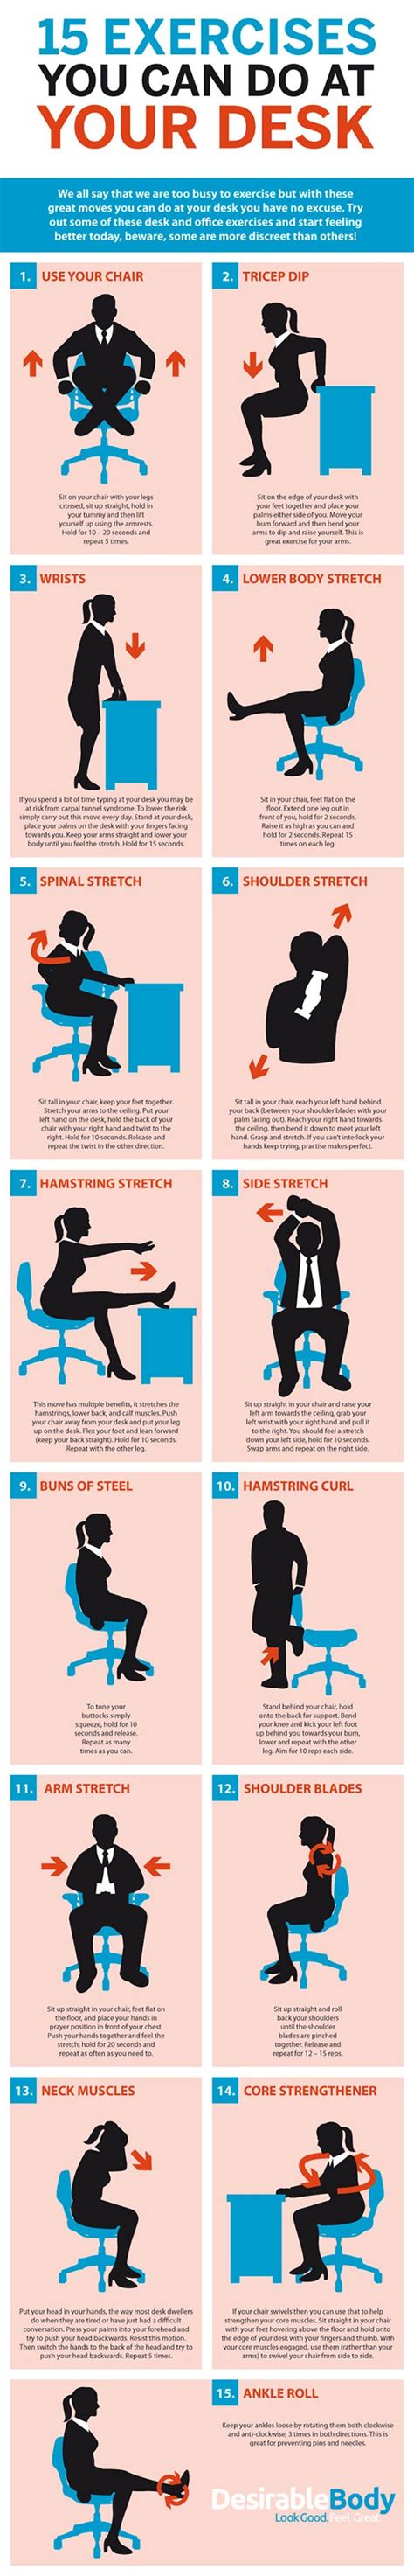 I work out out like a beast in the gym every day and have a physique that rivals eugen sandow's. 15 Exercises You Can Do at Your Desk